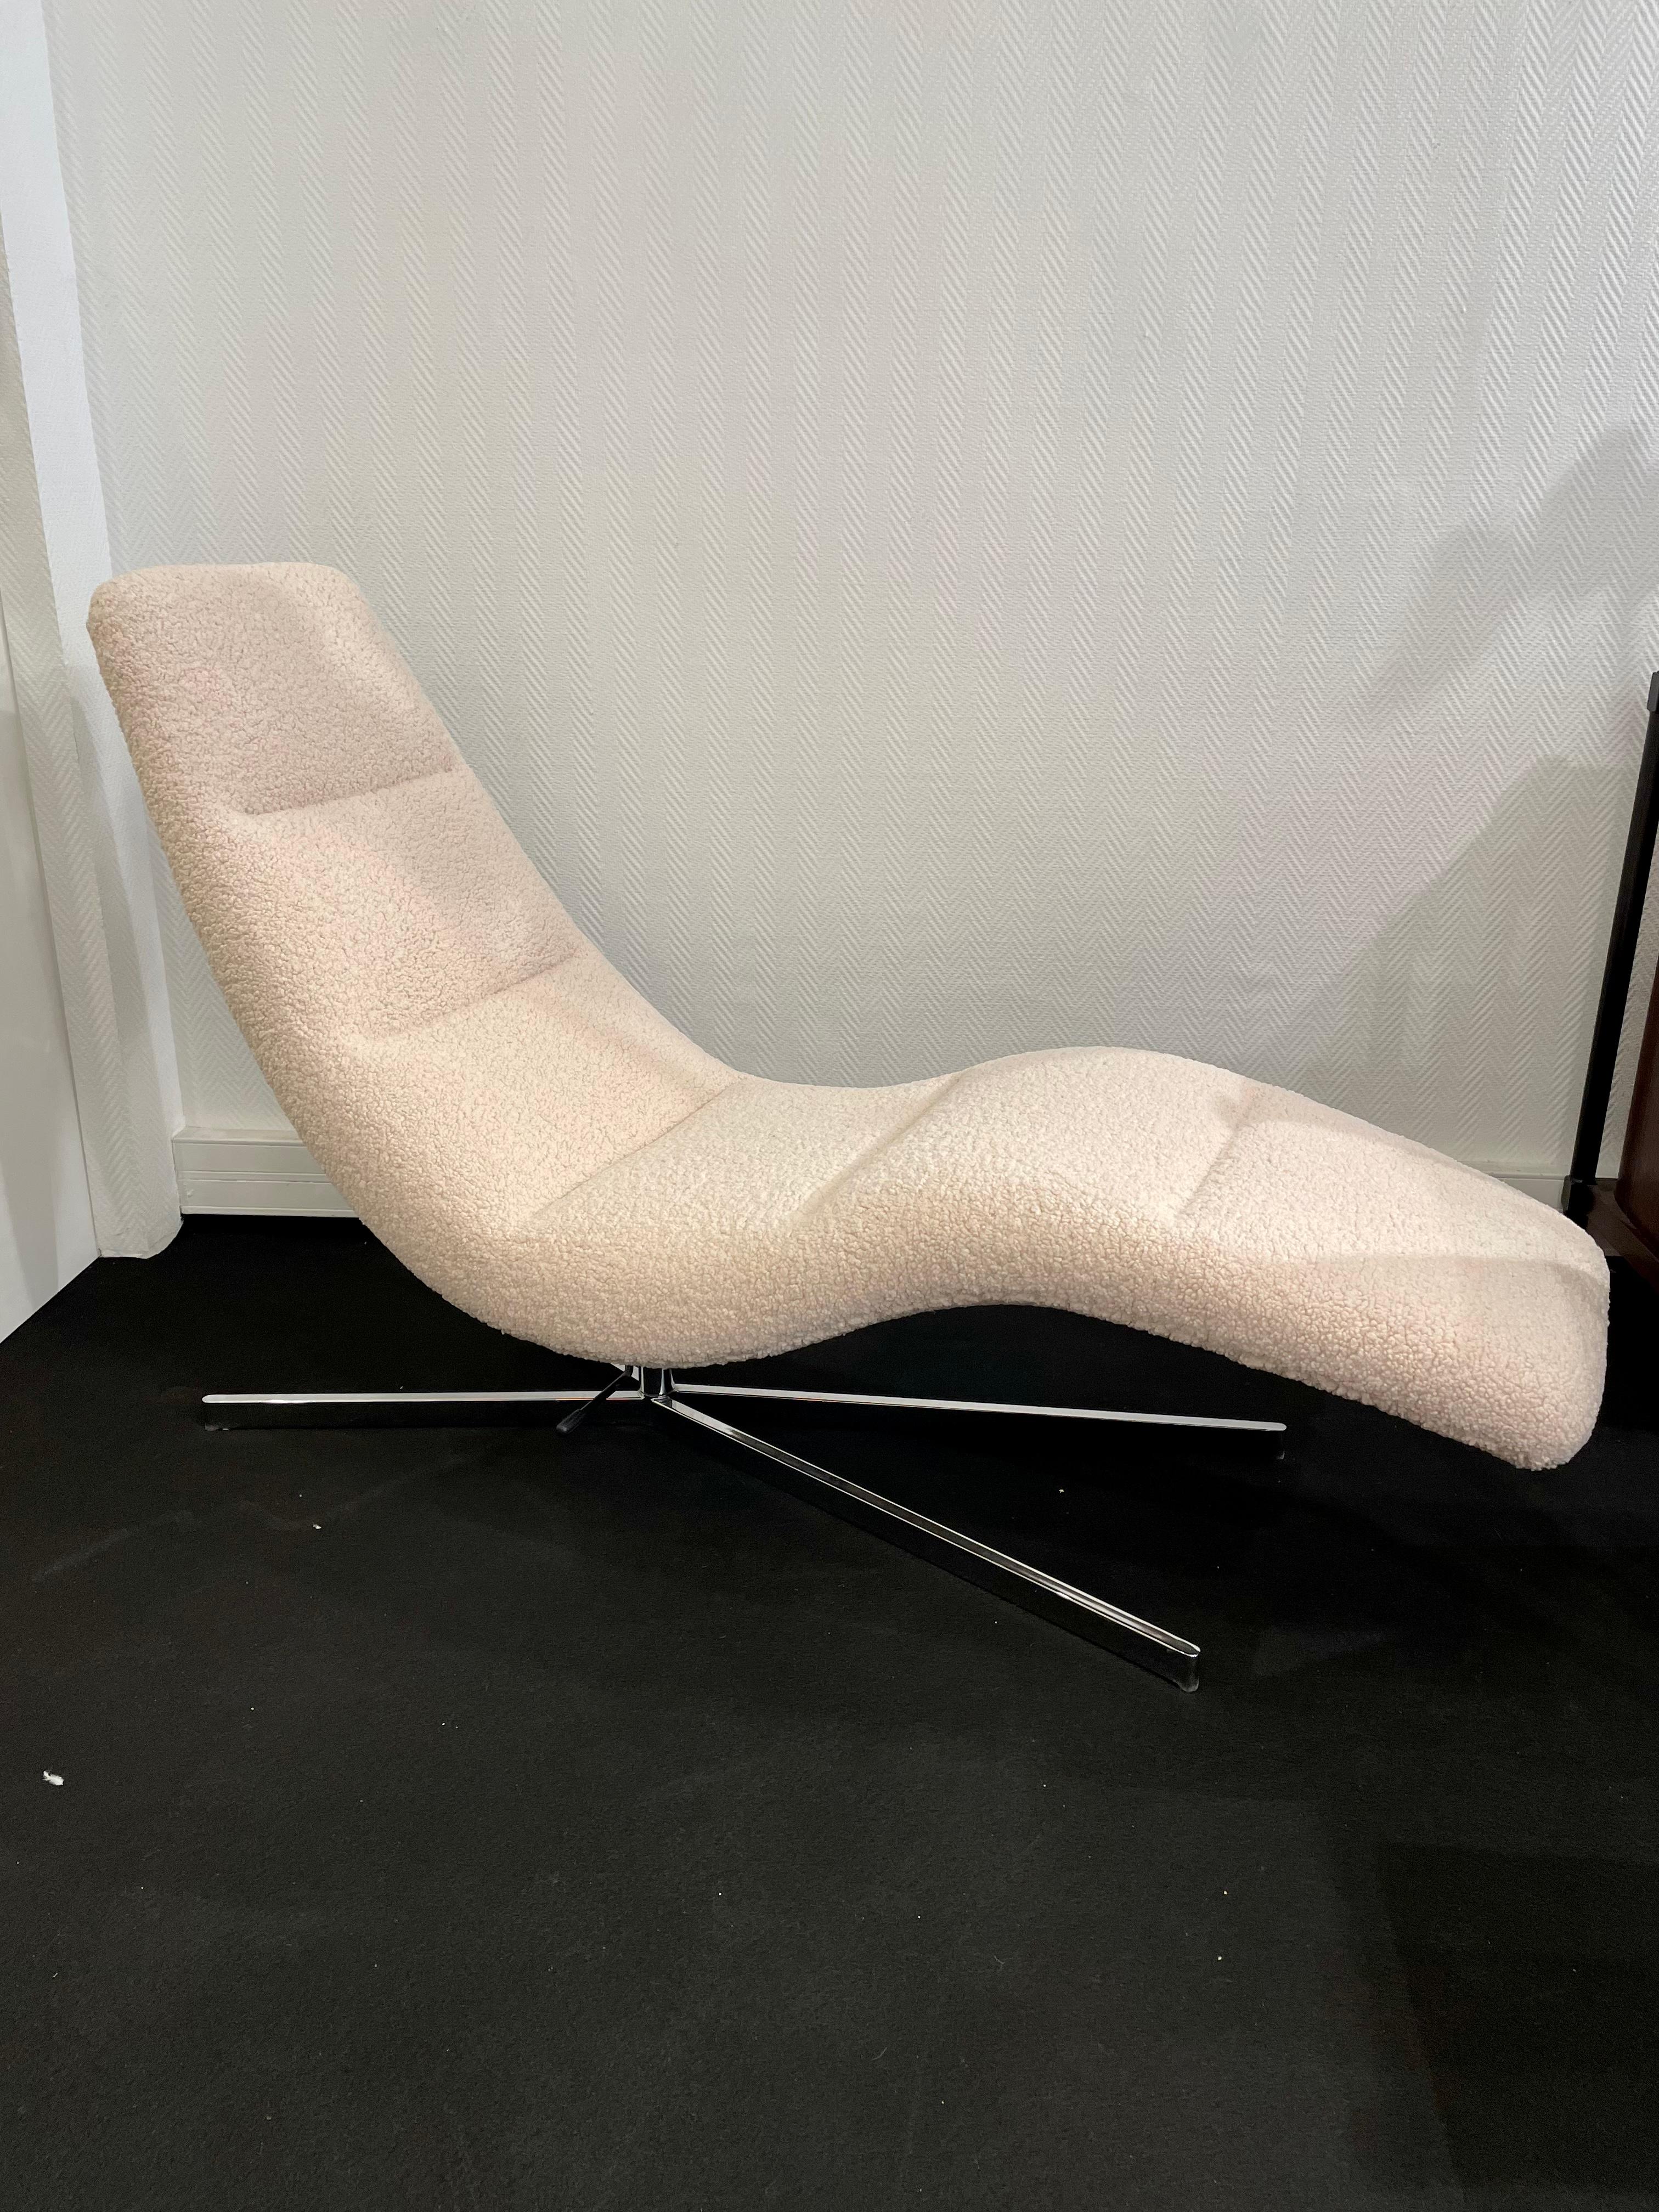 Chrome Lounge Chair 1990 -2000 For Sale